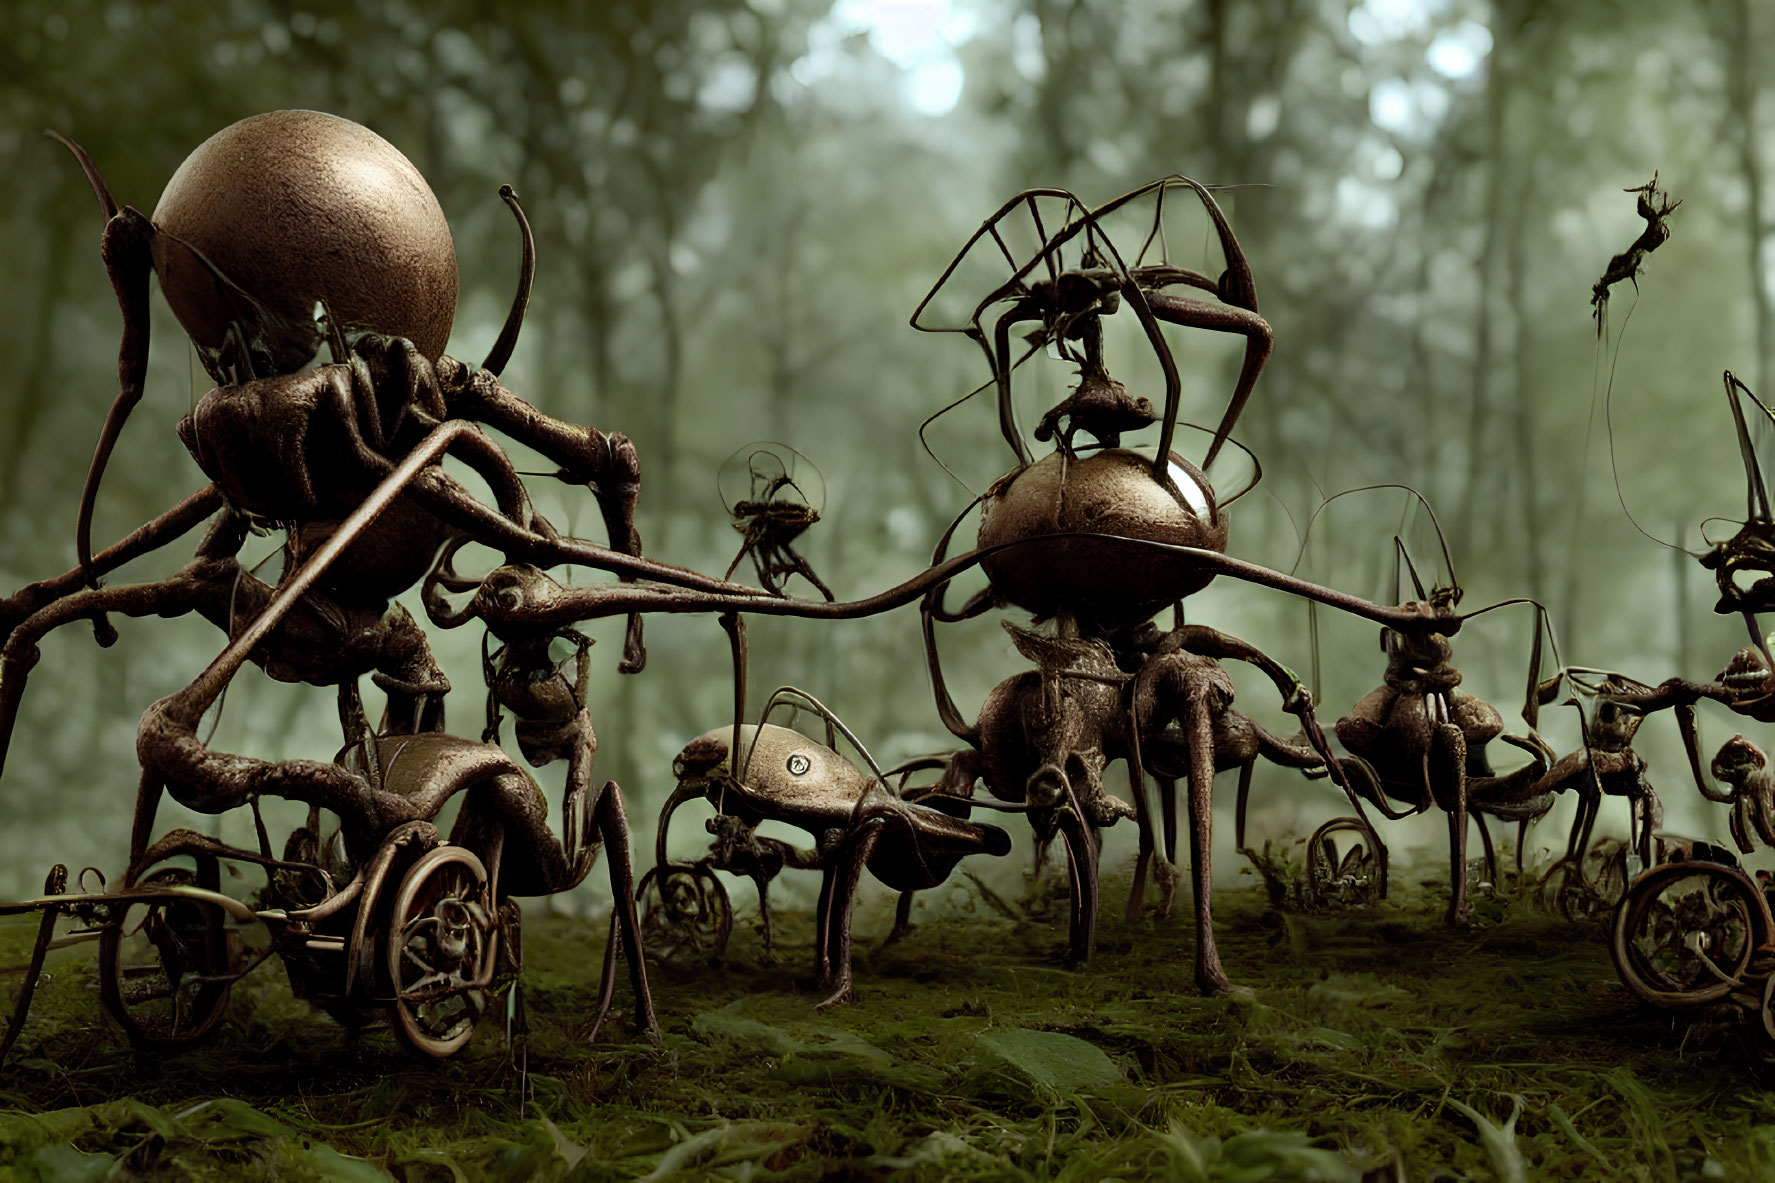 Mechanical Ants in Misty Forest with Steampunk Aesthetic